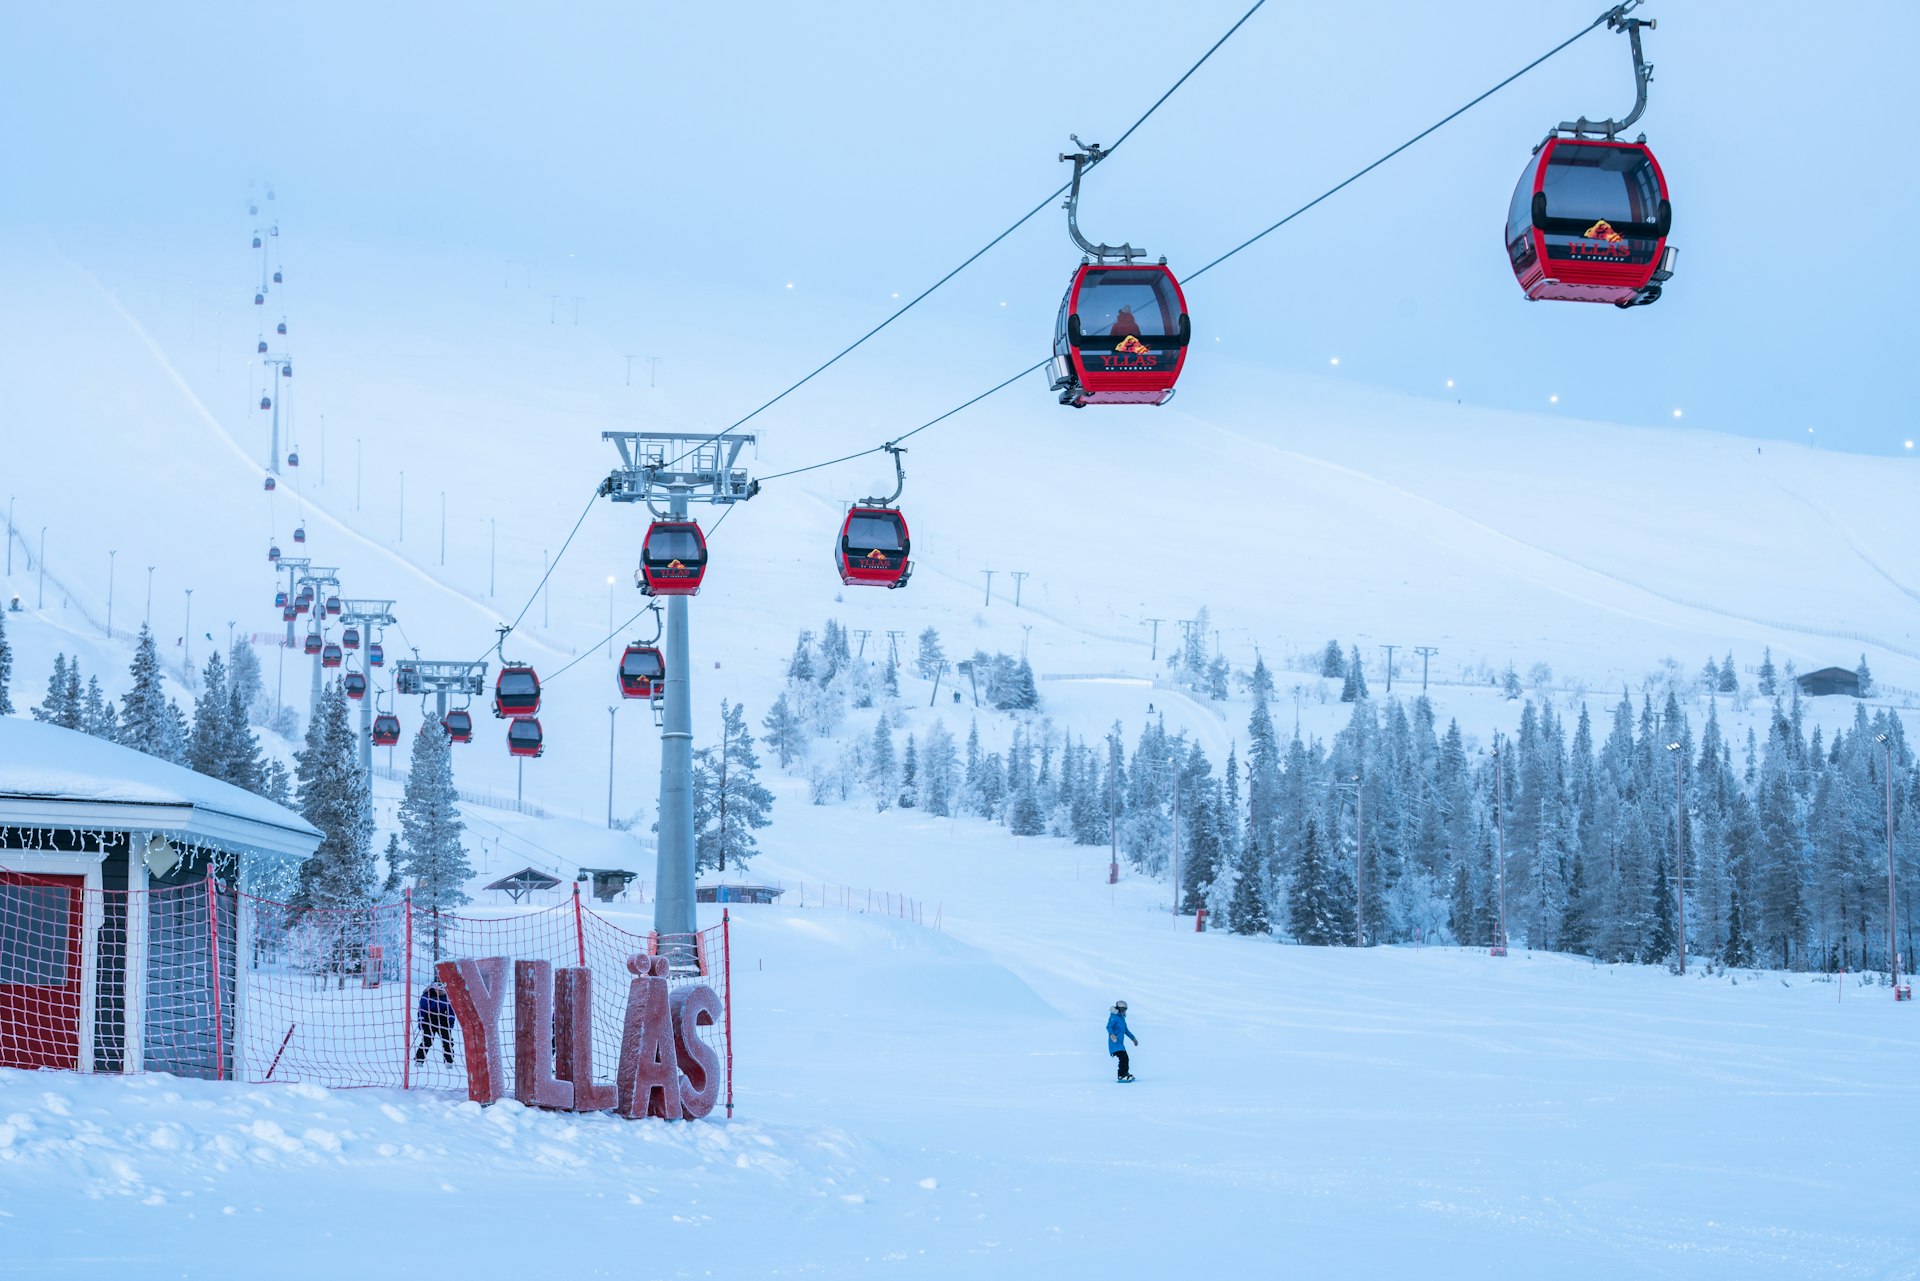 A series of red gondolas travel along a wire leading up a ski slope covered in snow in Yllas, Finland